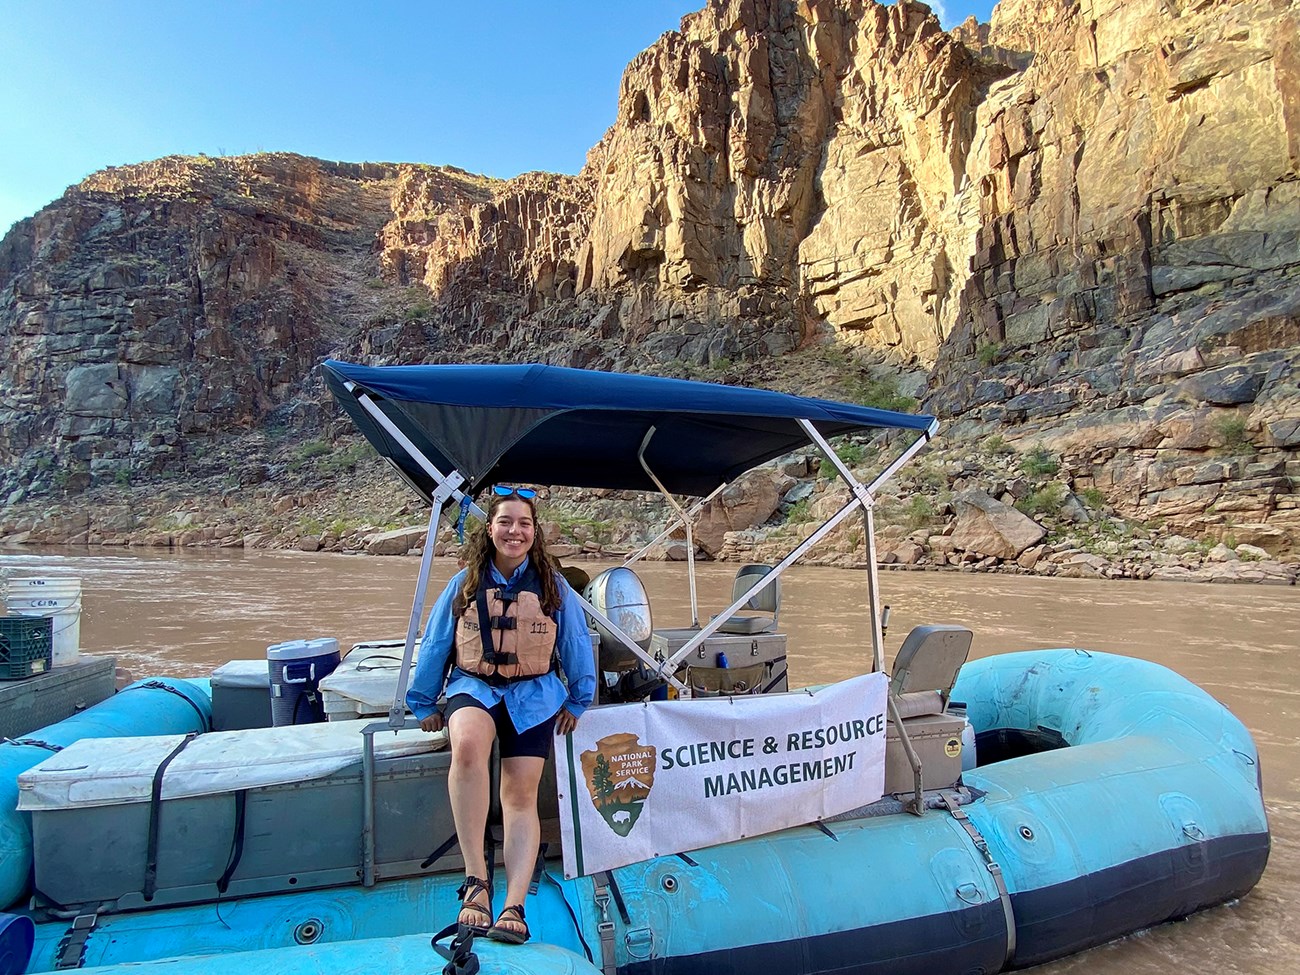 Cavezza leans against a raft with a sign with the NPS logo that says, "Science and Resource Management." Behind here is the Colorado River and the bluffs of the canyon.